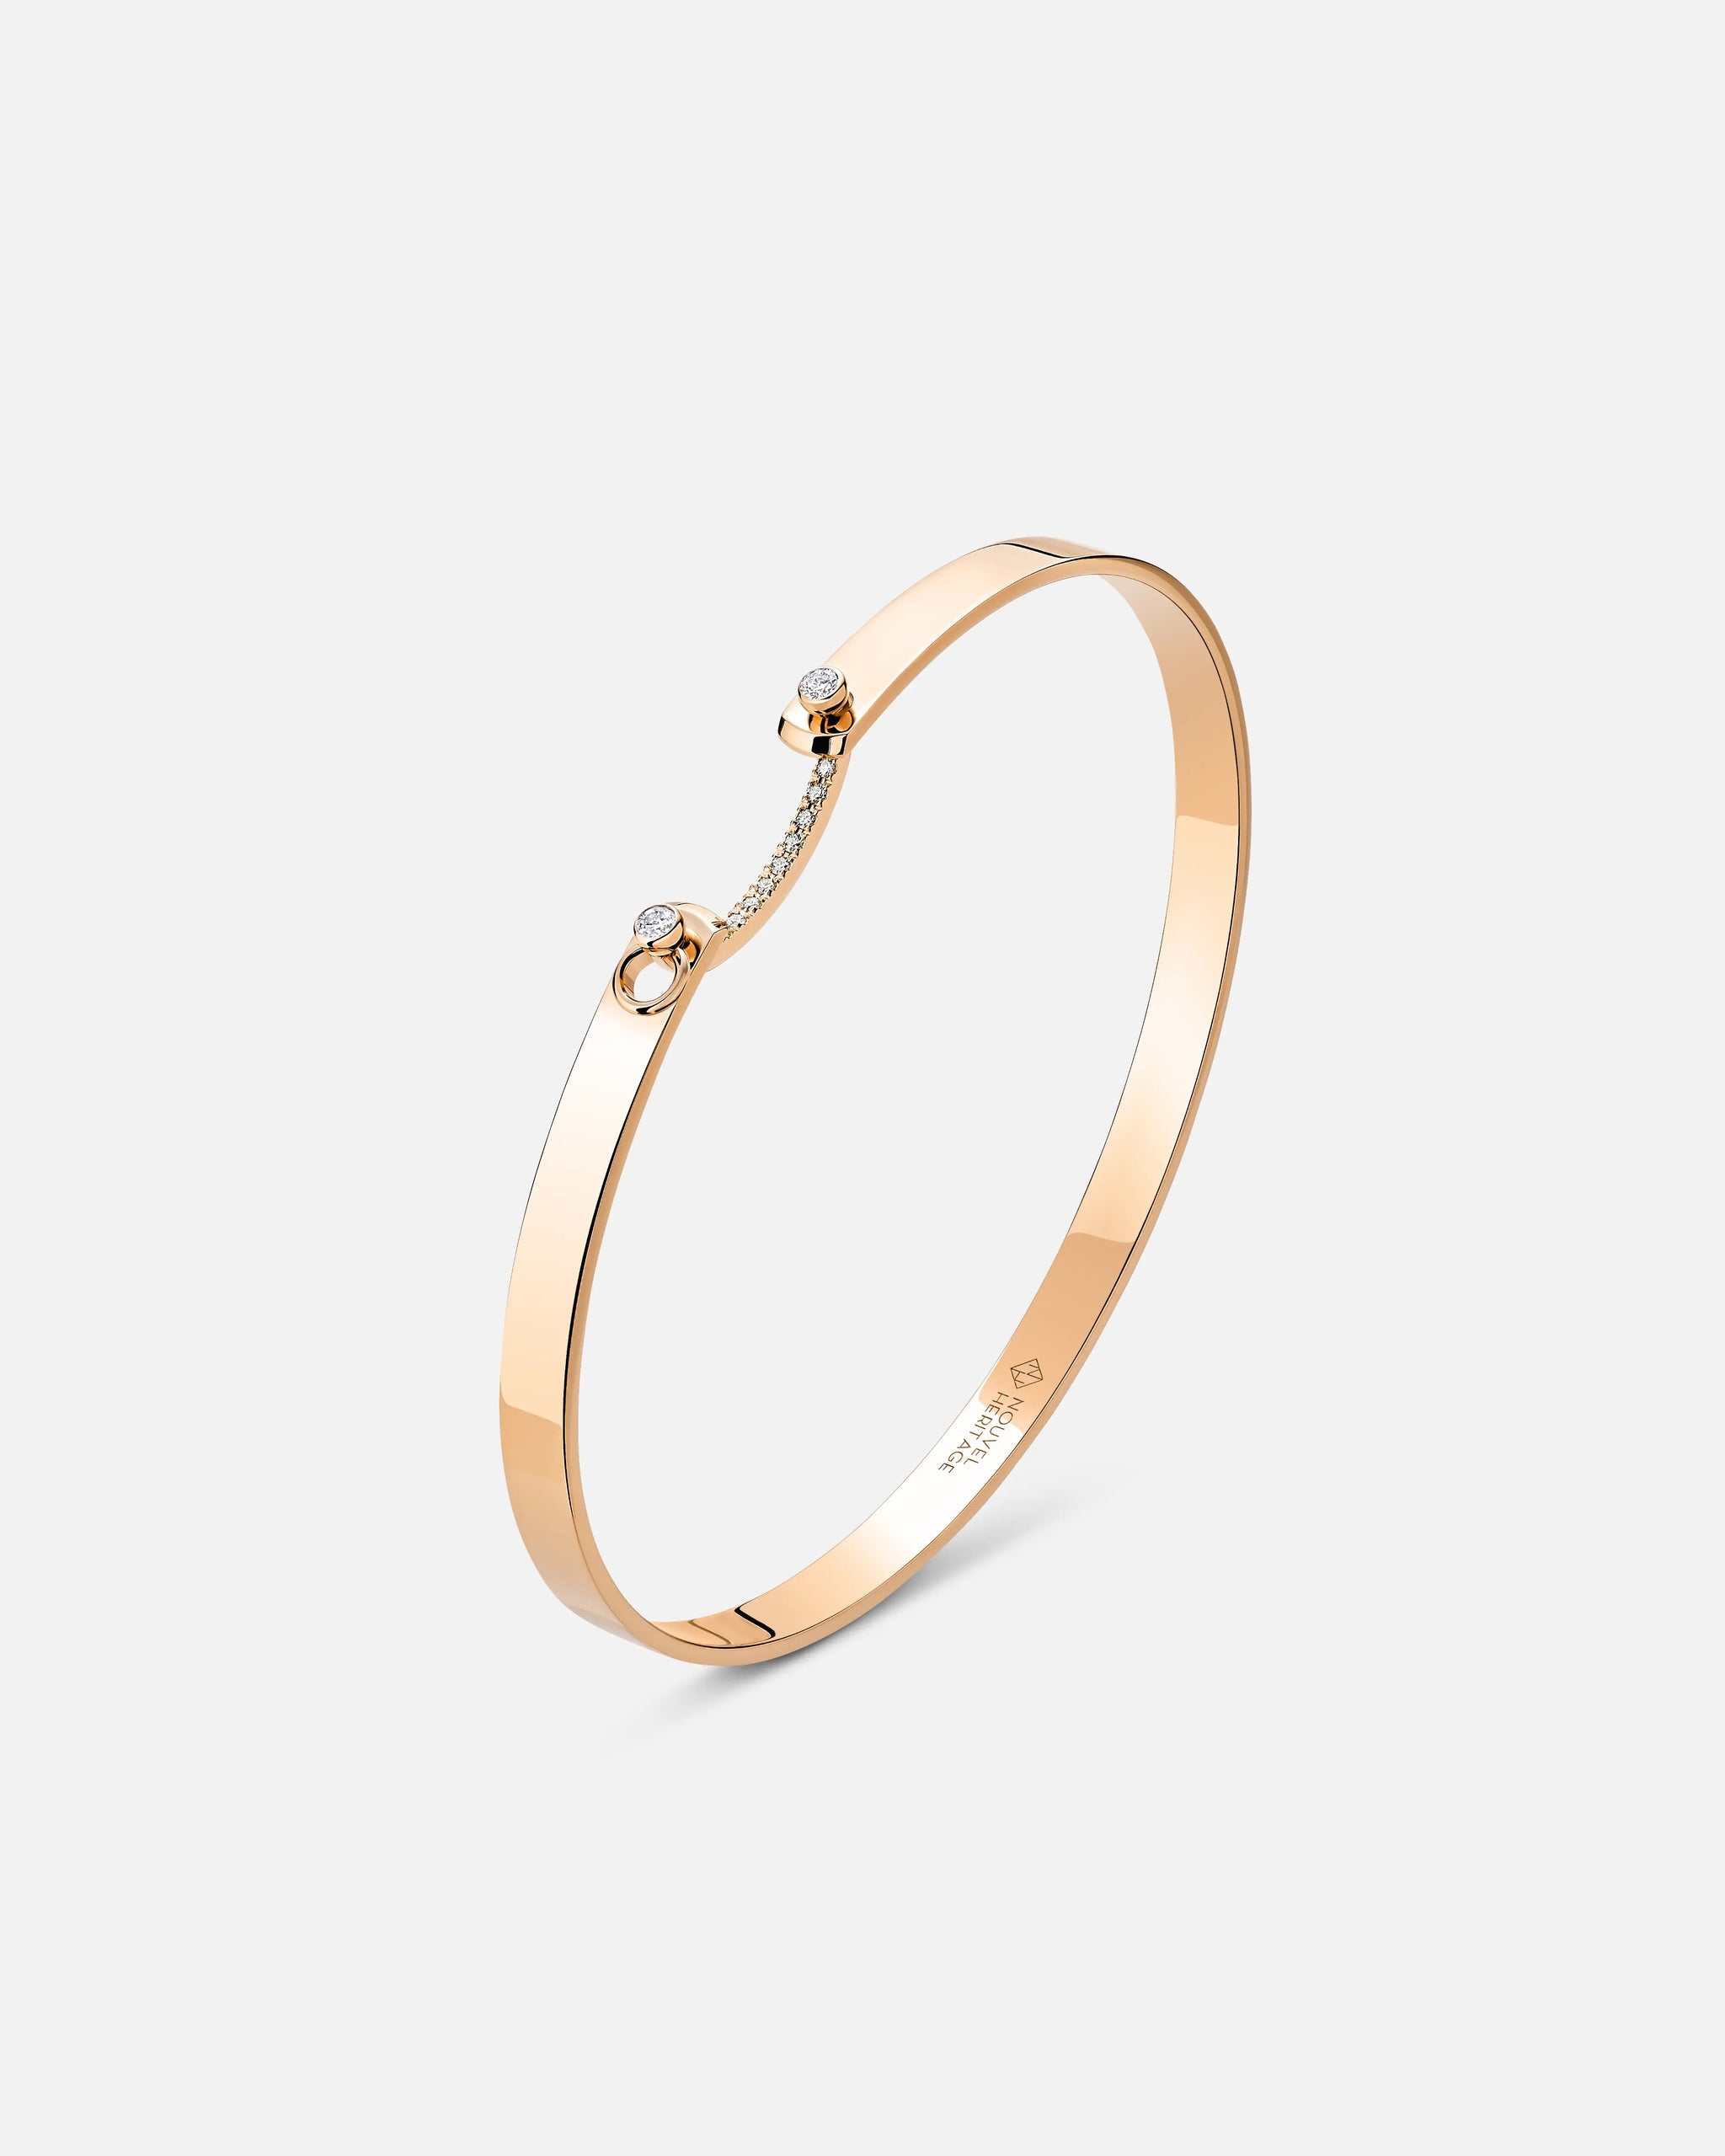 Business Meeting Mood Bangle in Rose Gold - 1 - Nouvel Heritage